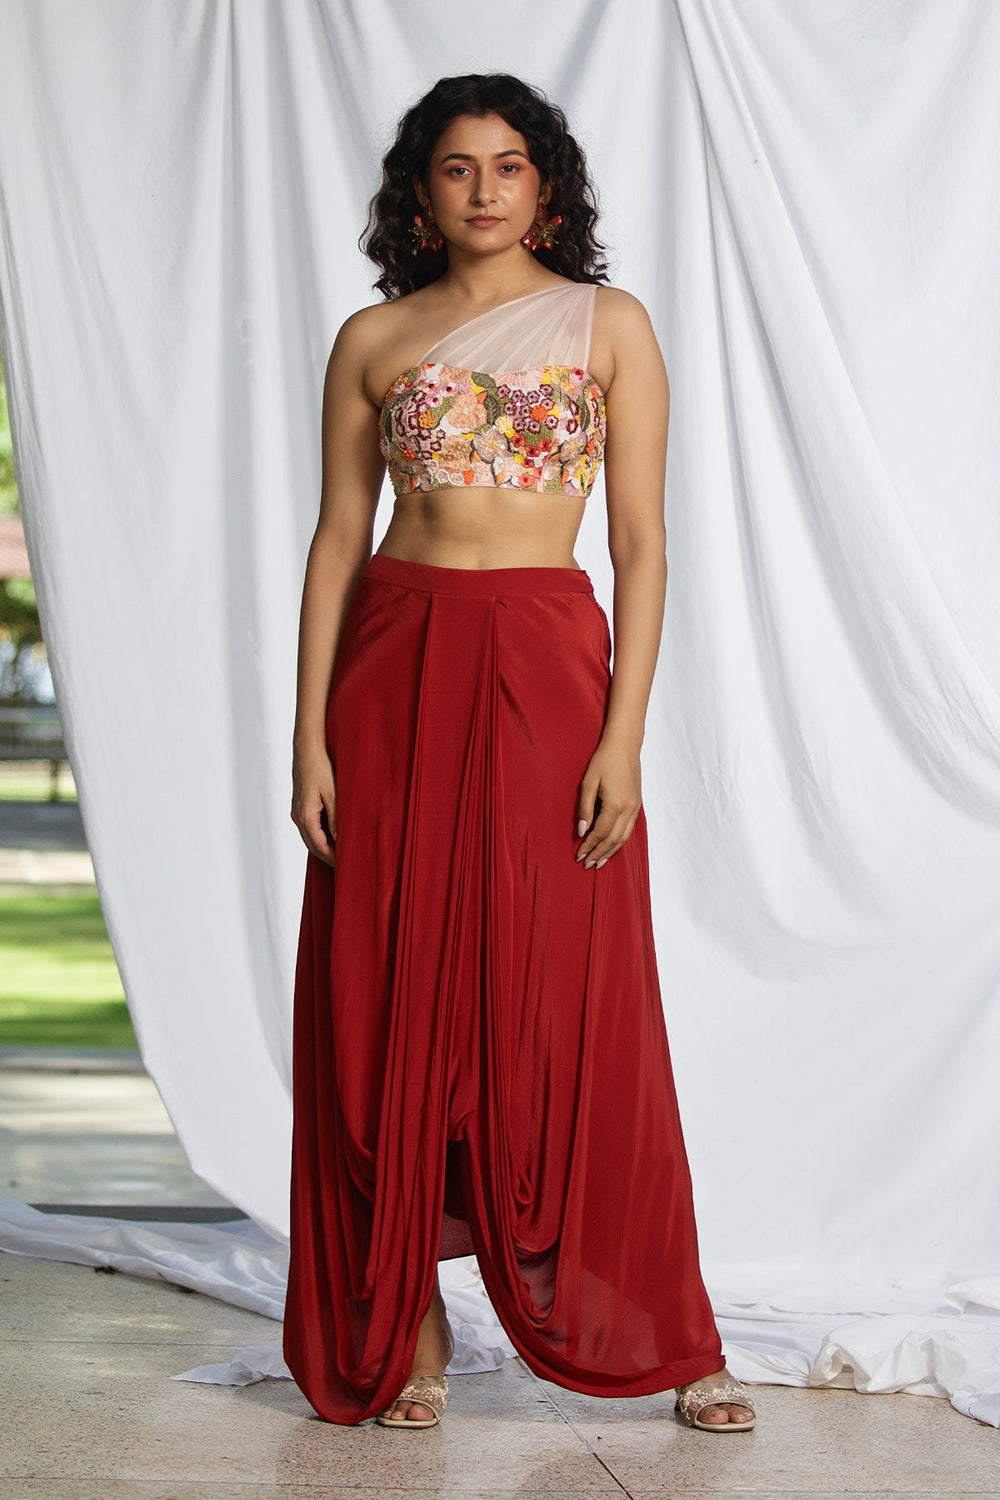 Botanical embroidered blouse with dhoti skirt